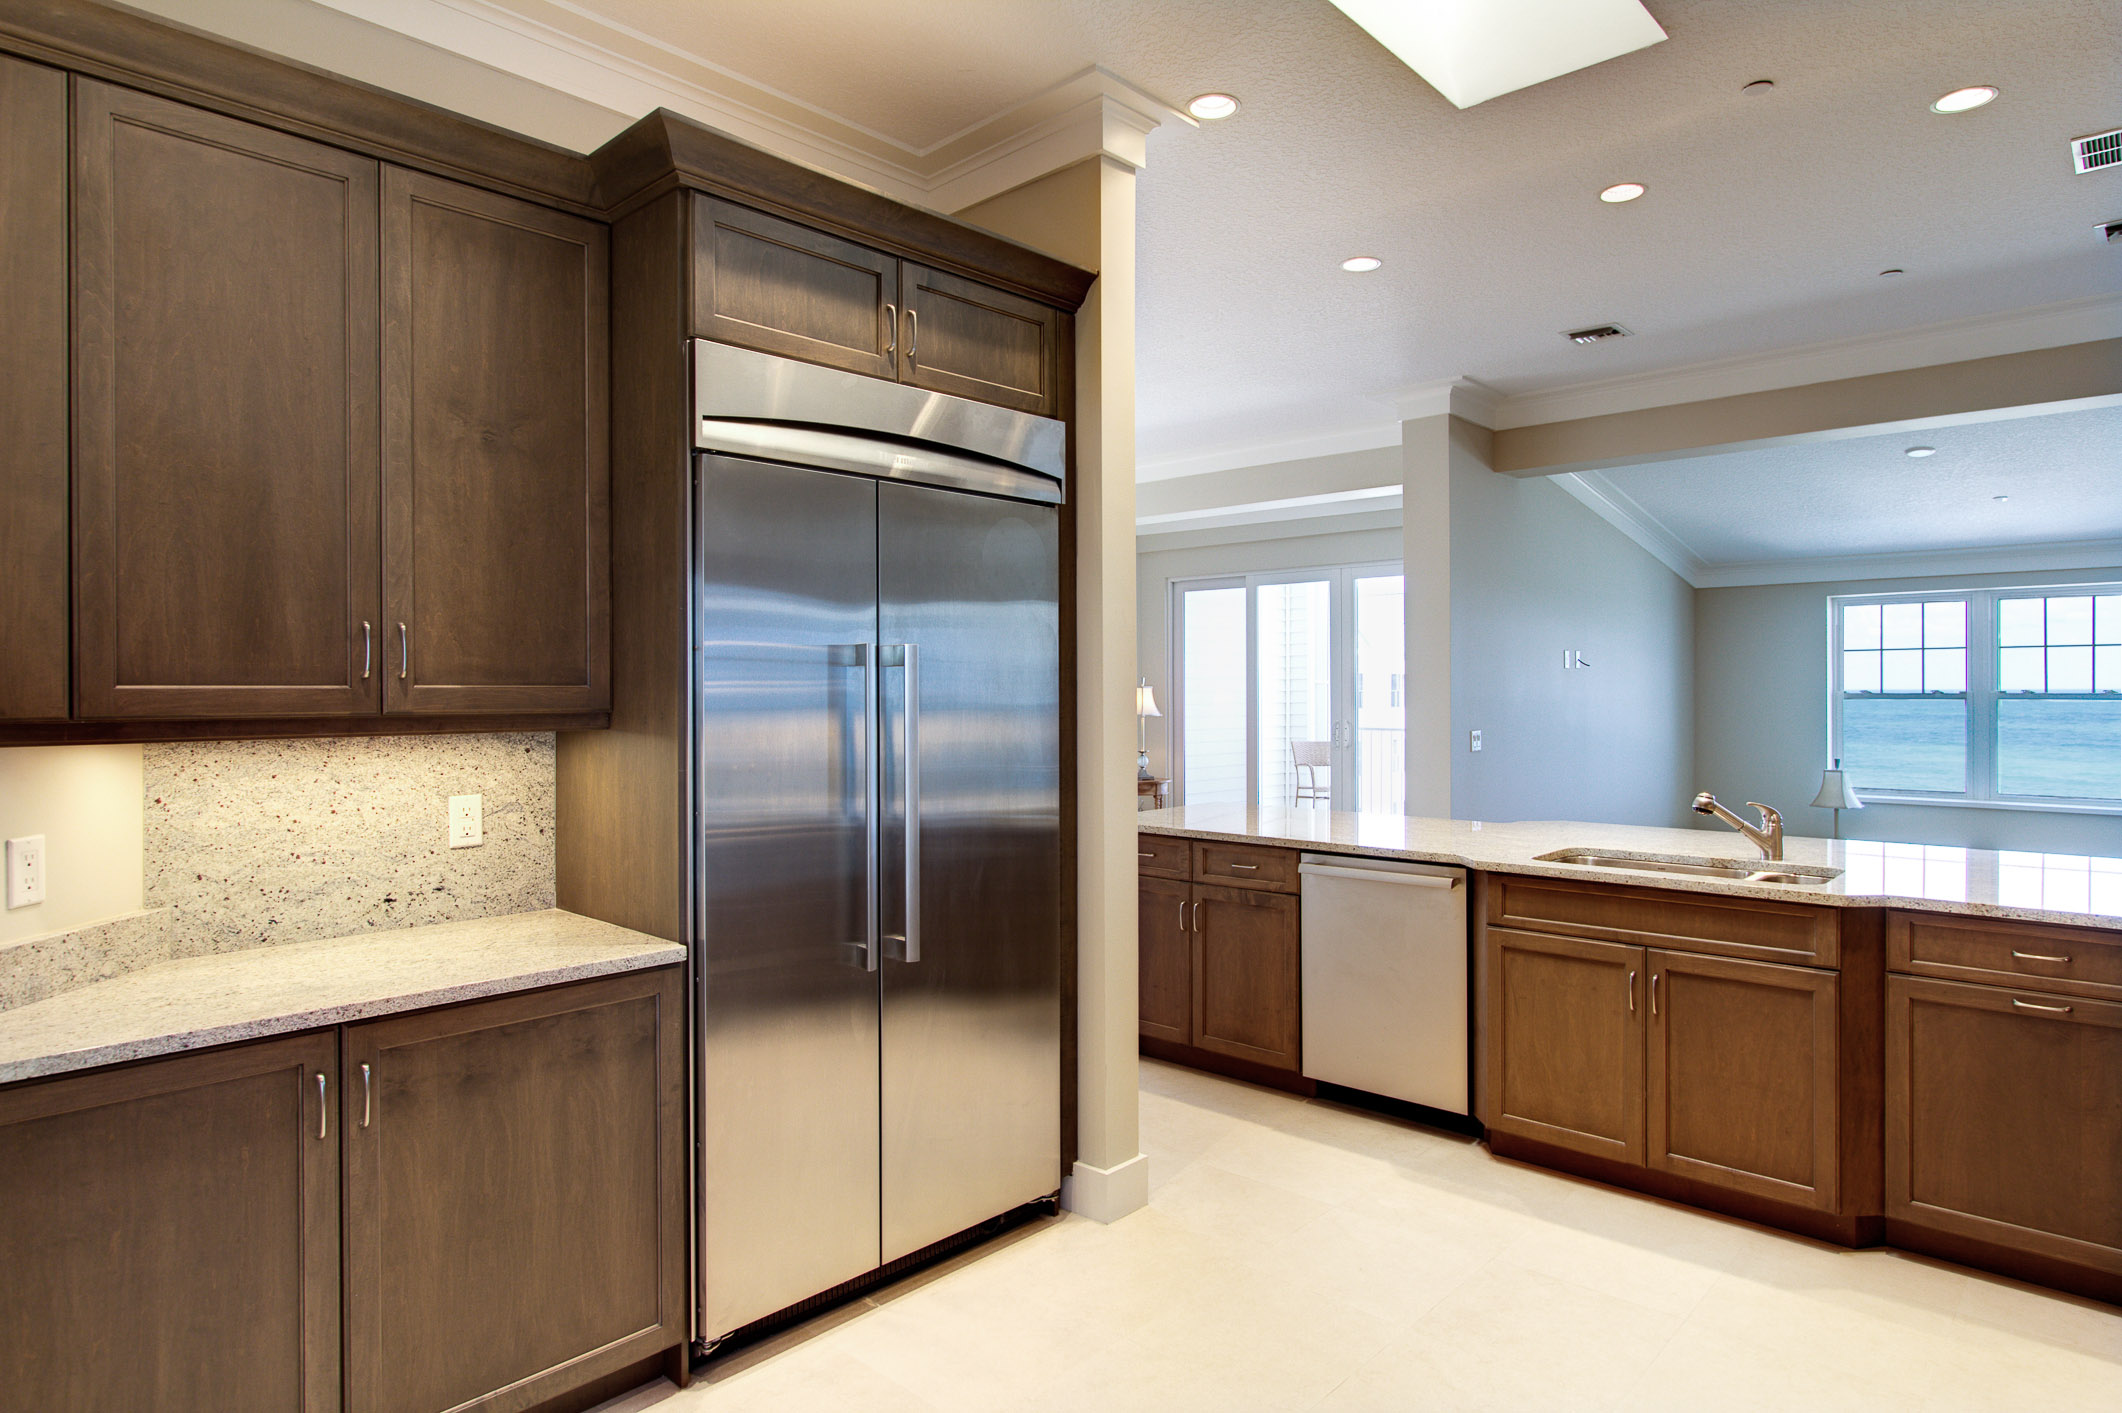 Modern kitchen update at the Gables with stone countertops, stainless steel fridge and ocean views